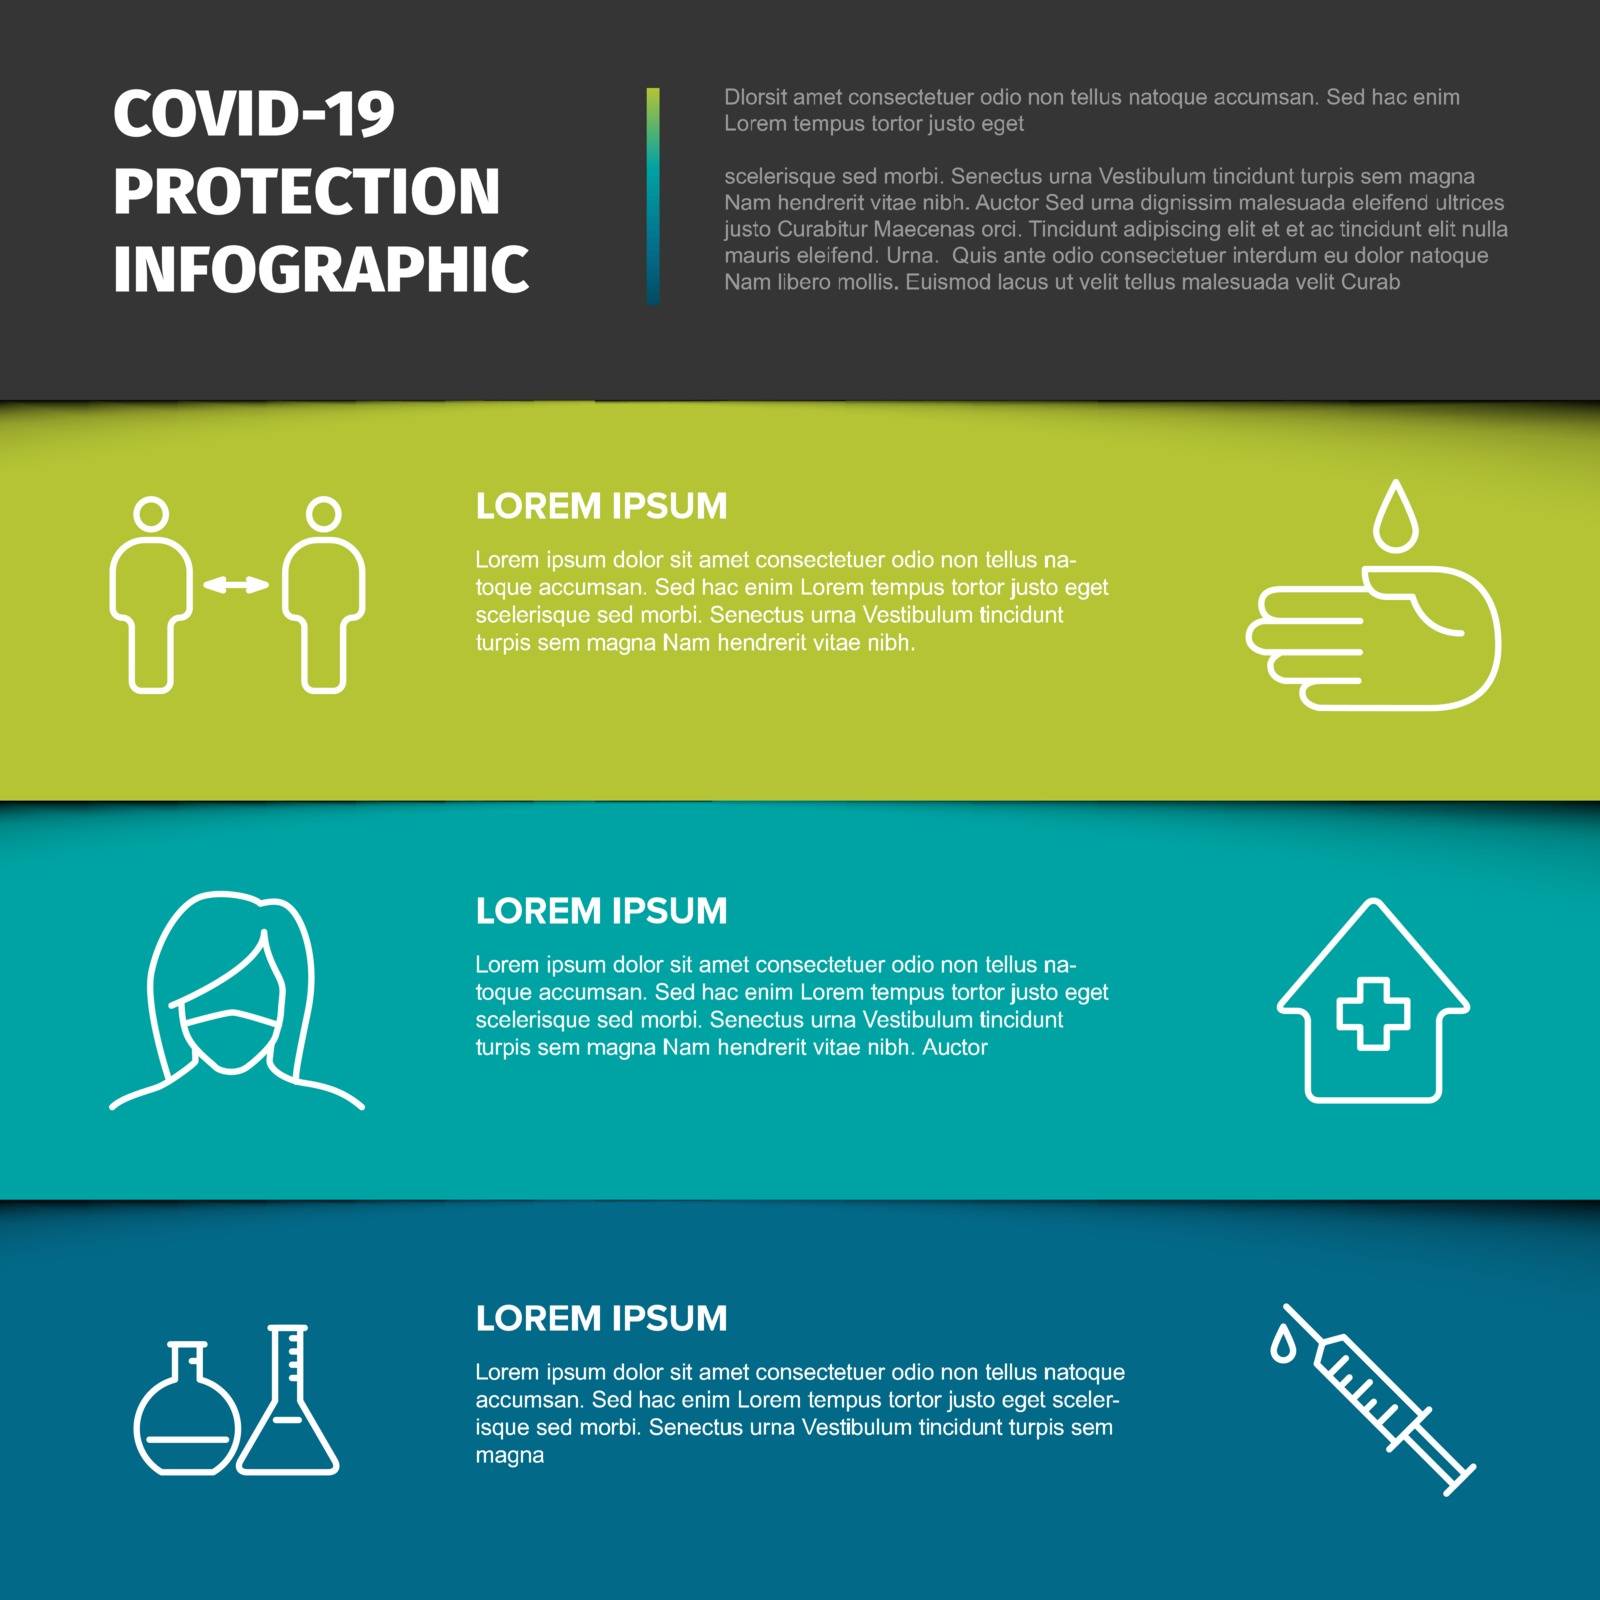 Covid-19 prevention infographic template - mask, people distance, washing hands, stay at home 